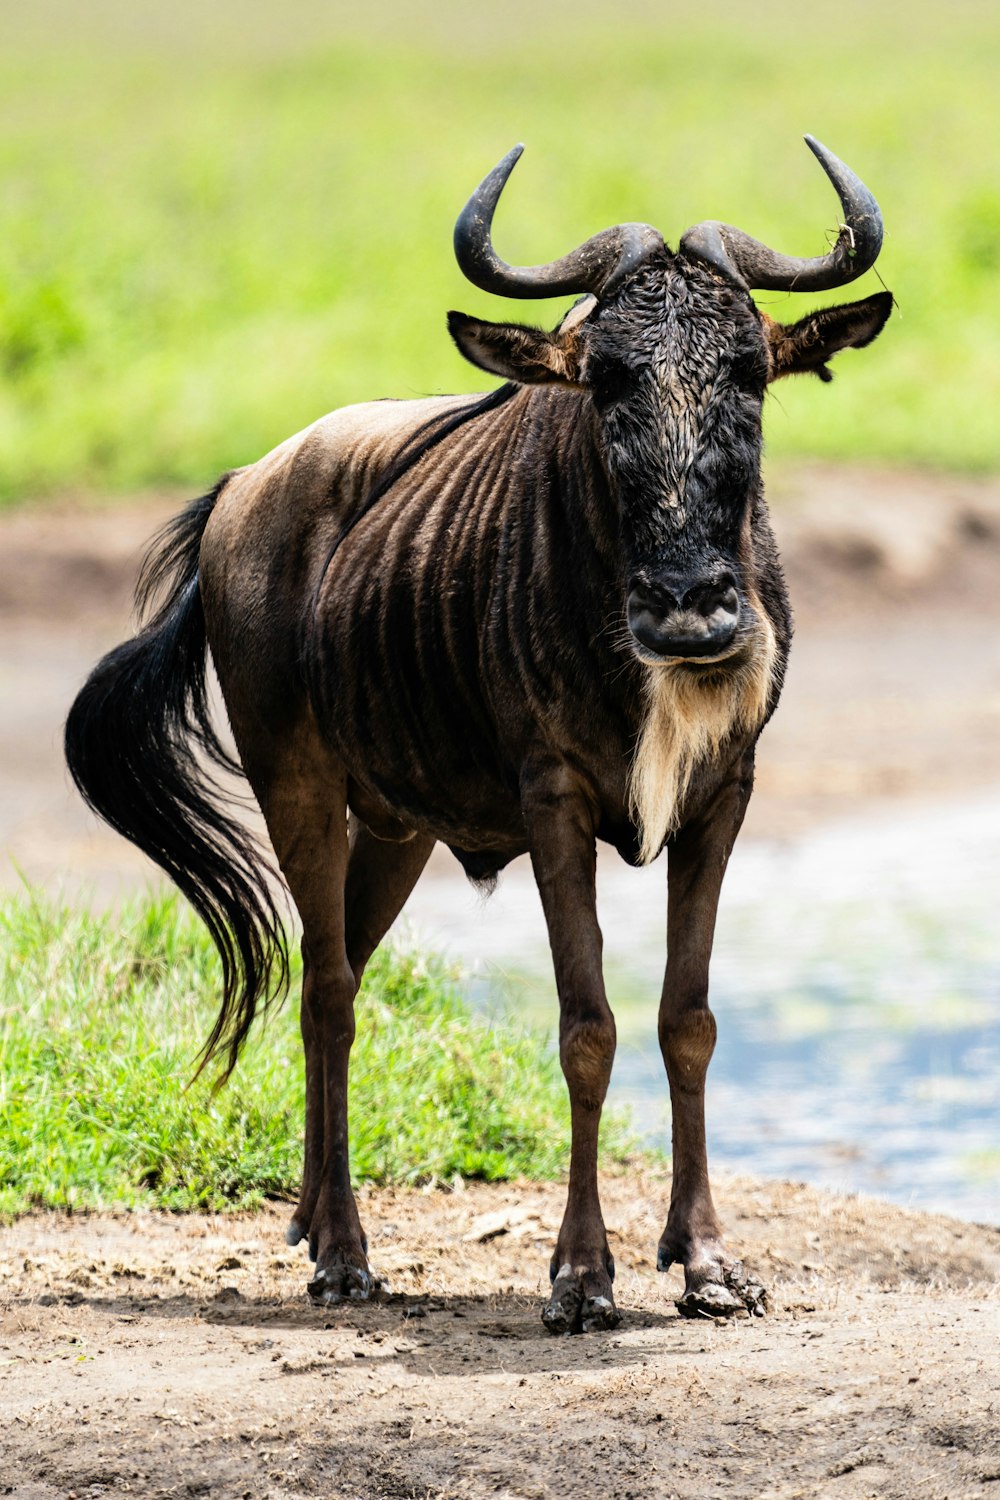 a bull with large horns standing on a dirt road